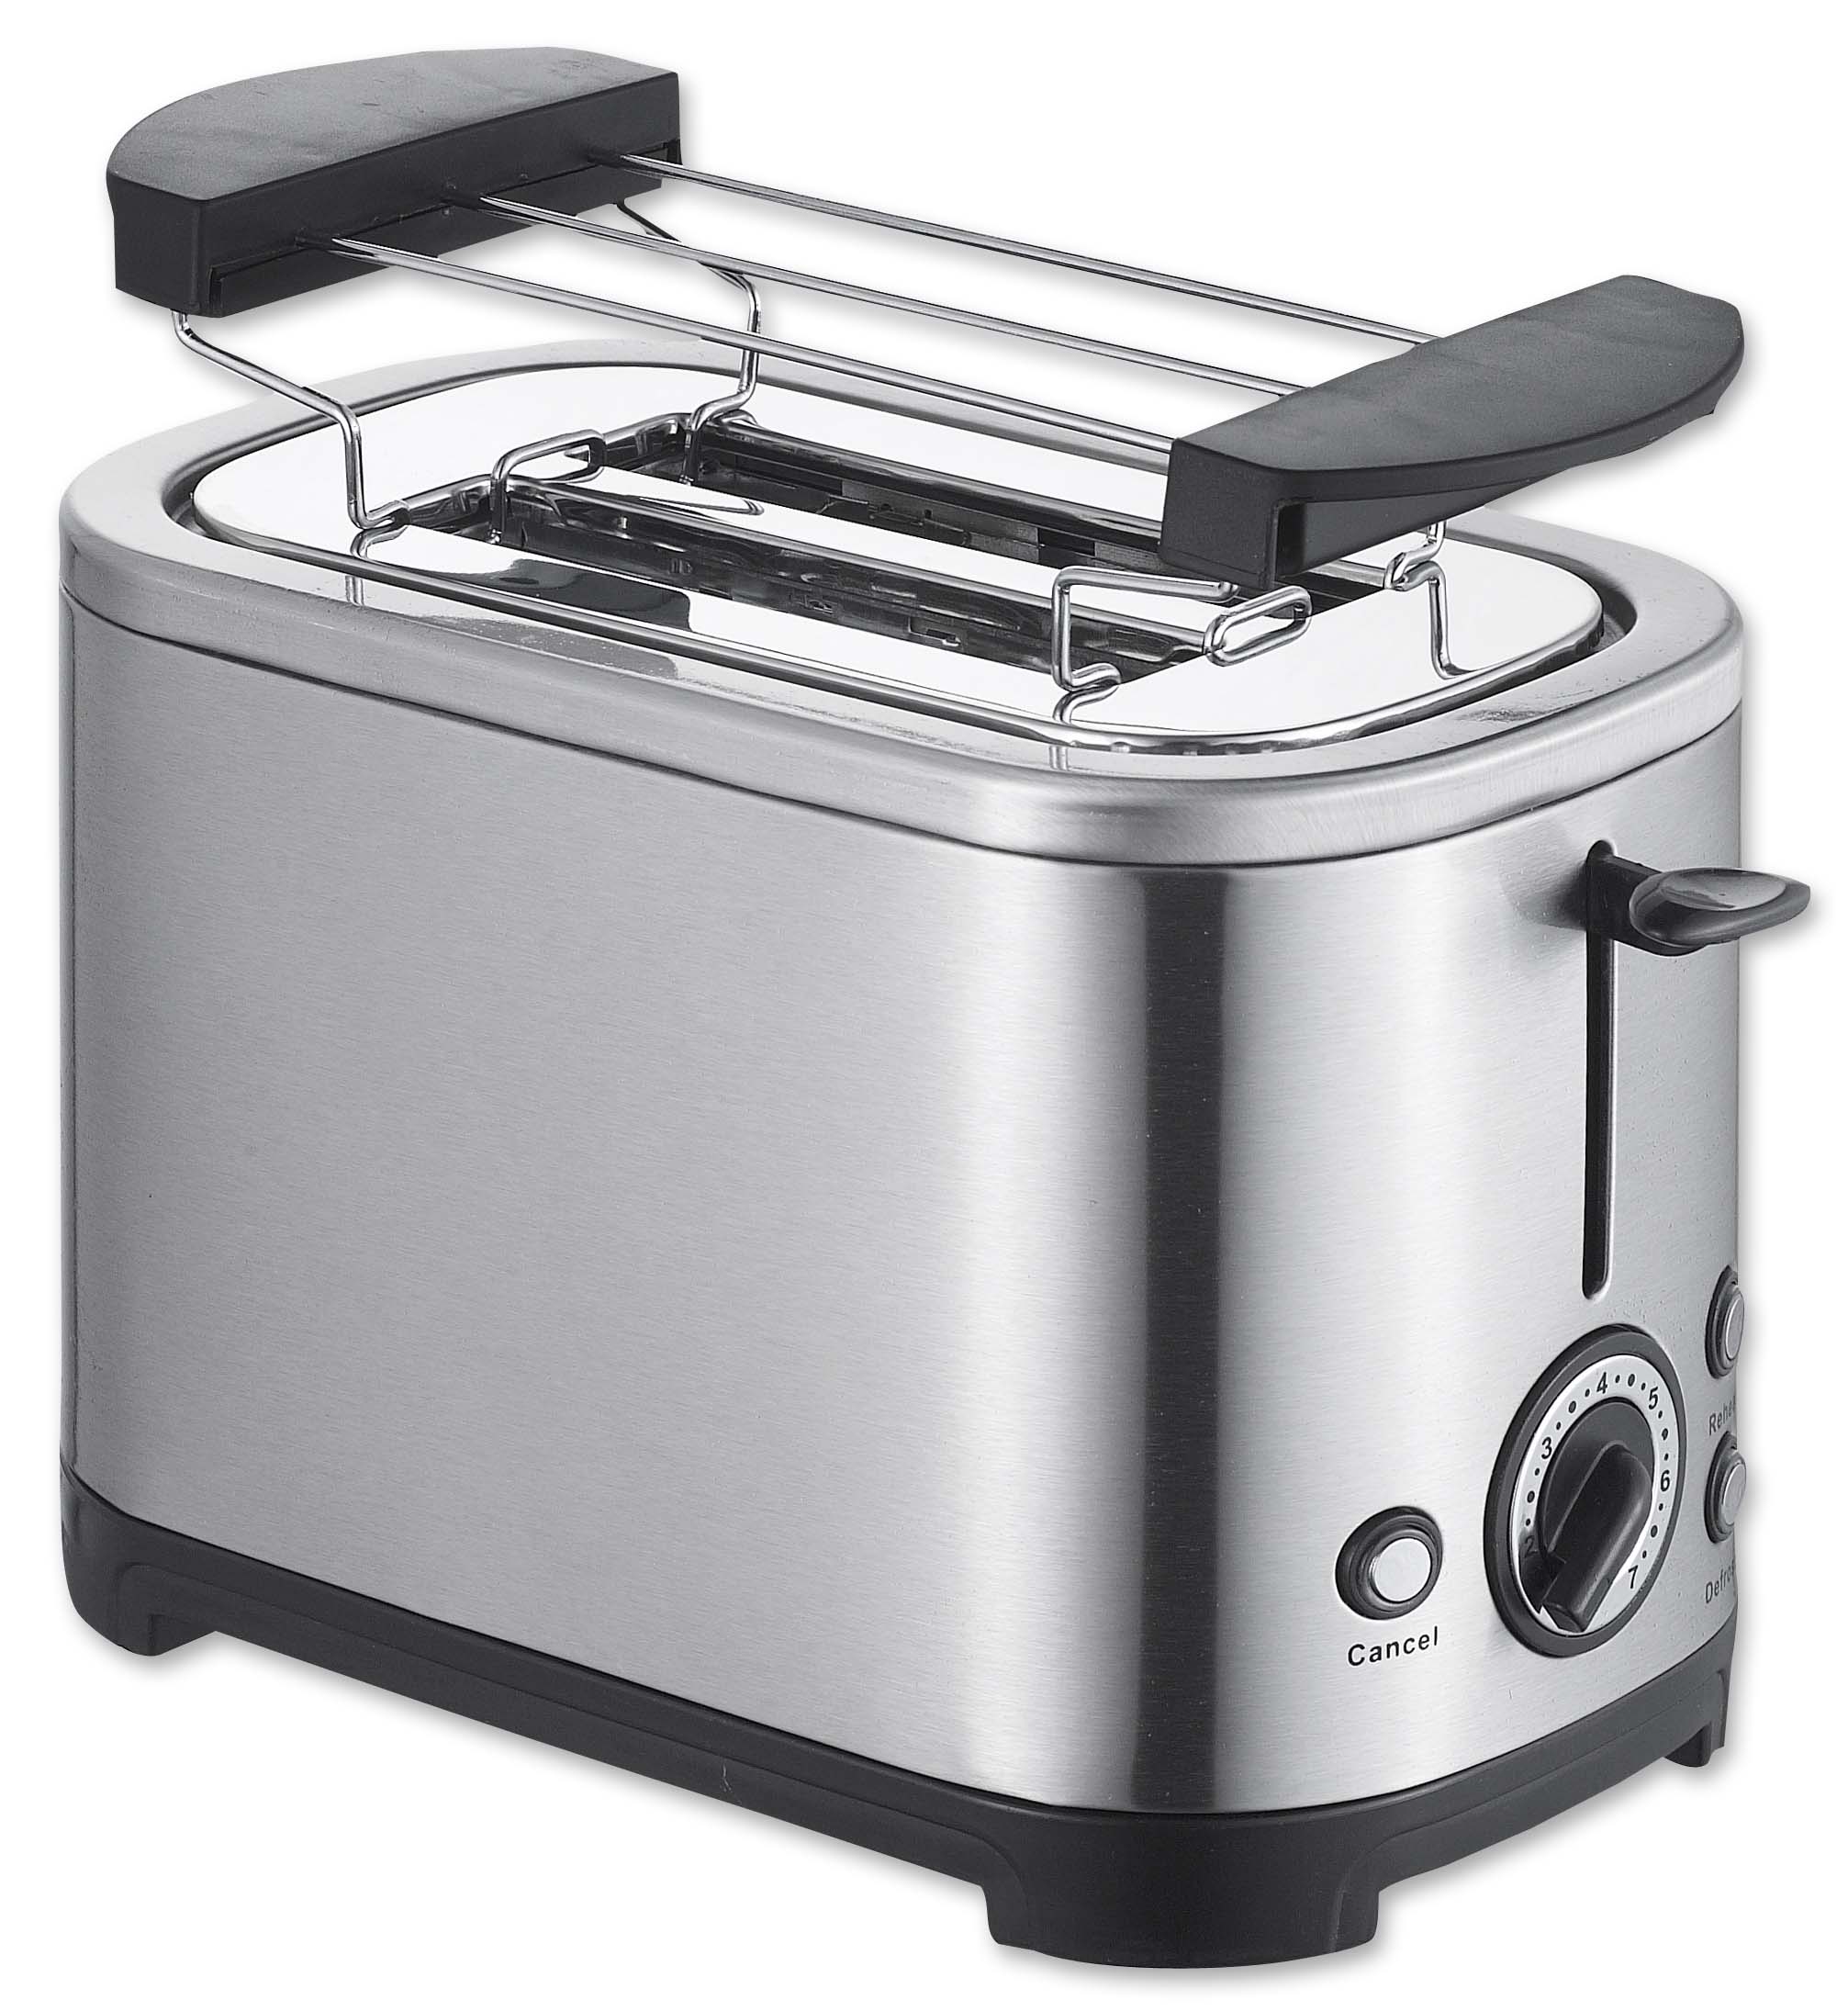 Stianless steel toasters multifunction defrost reheat cancel with indicator light toaster